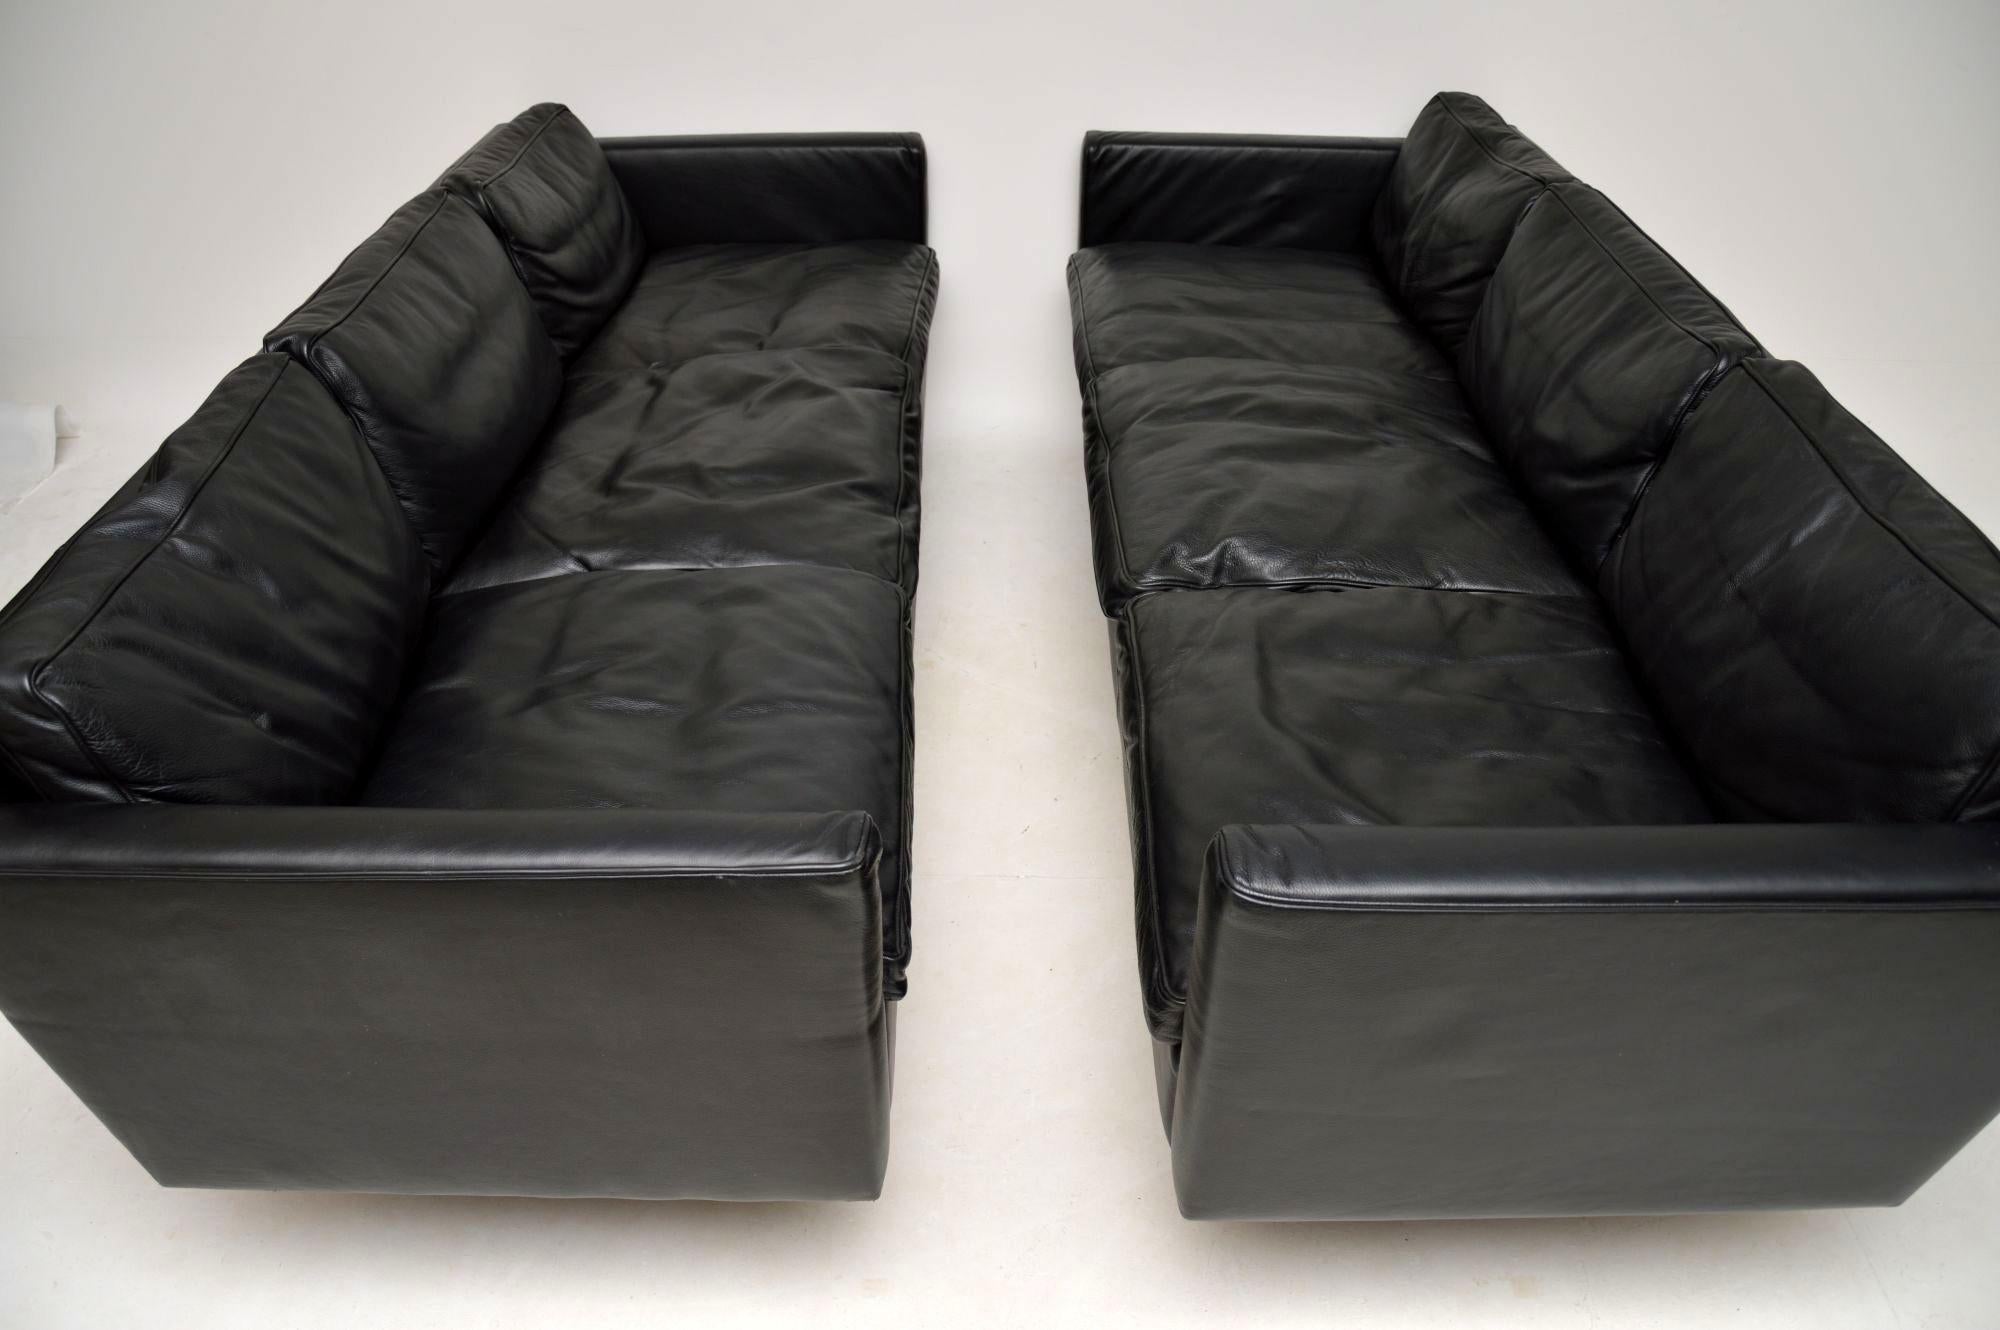 A very stylish, extremely well made and very comfortable pair of vintage black leather sofas, these were made in Denmark, circa 1970-1980s. They are in excellent condition, with only some very minor surface wear, they have no rips or tears. The